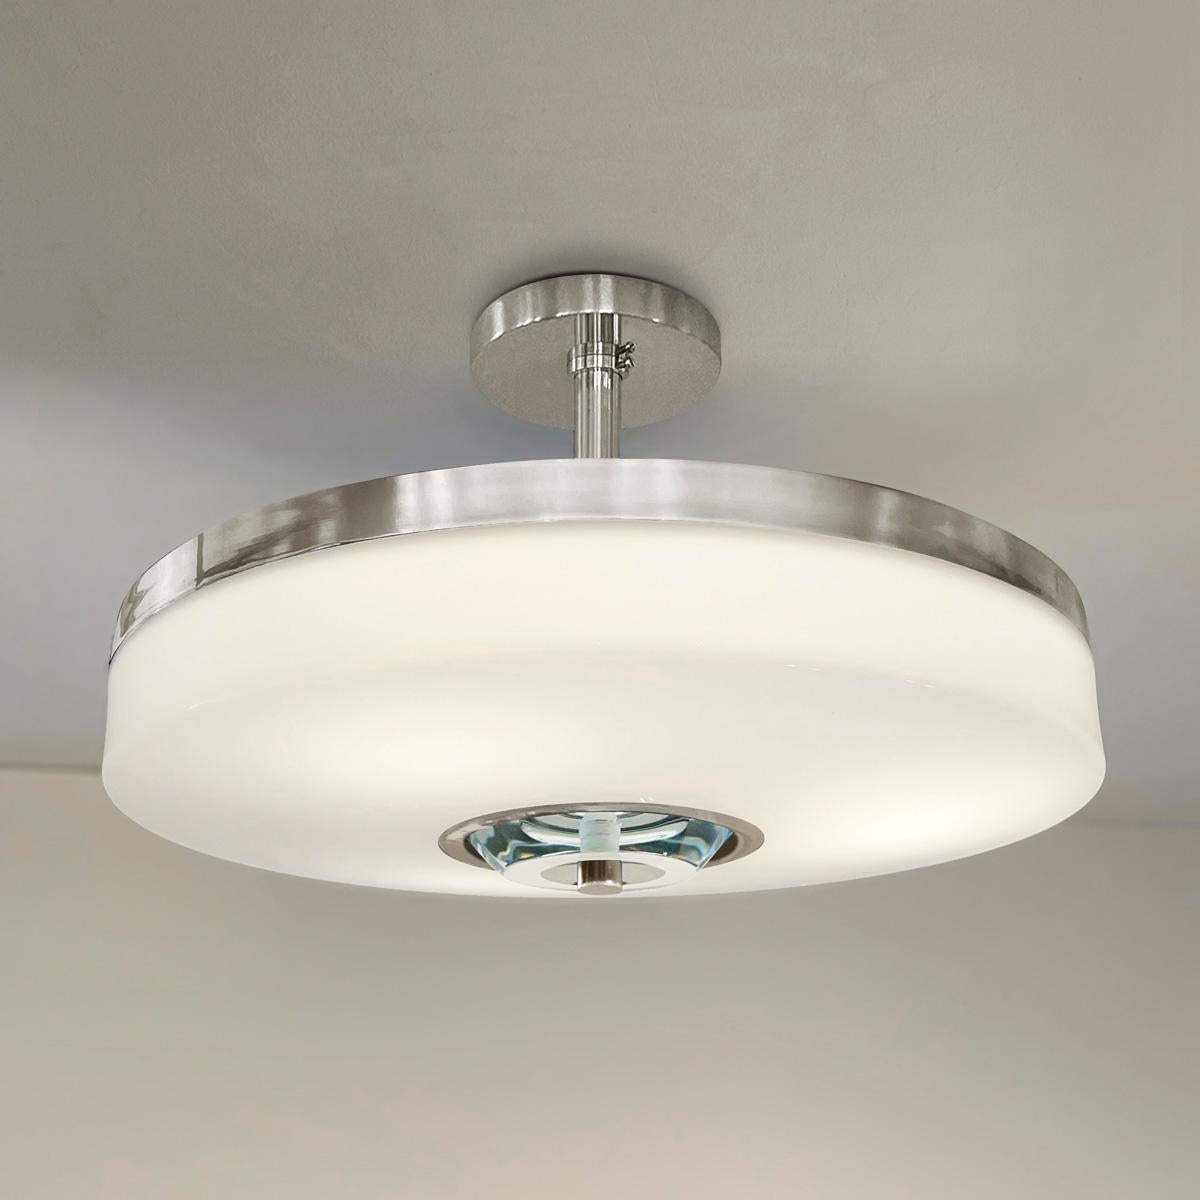 The Iris Piccolo ceiling light is designed around an acrylic shade with a hand carved glass center. This versatile fixture can be installed as a pendant on a stem or as a true flush mount. The first images show the fixture in our polished nickel